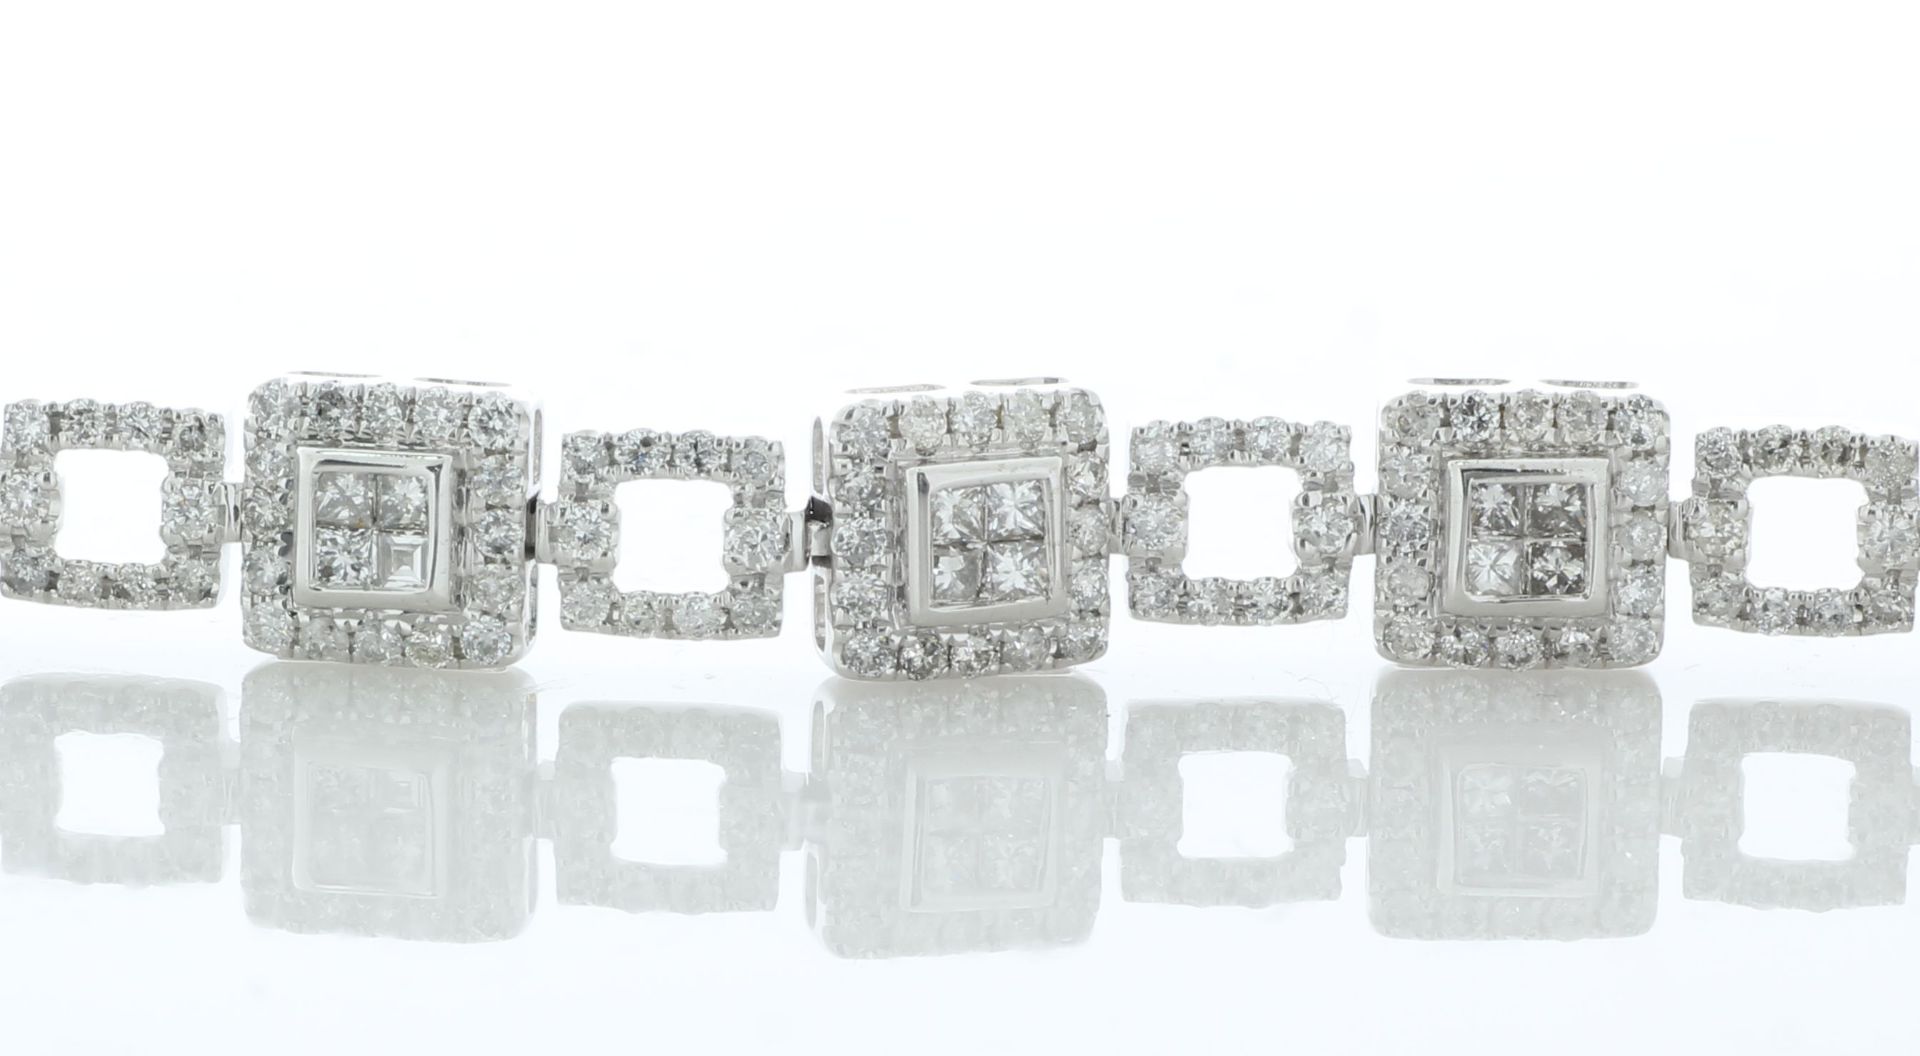 14ct White Gold Full Eternity Diamond Bracelet 3.80 Carats - Valued By IDI £19,850.00 - This - Image 2 of 4